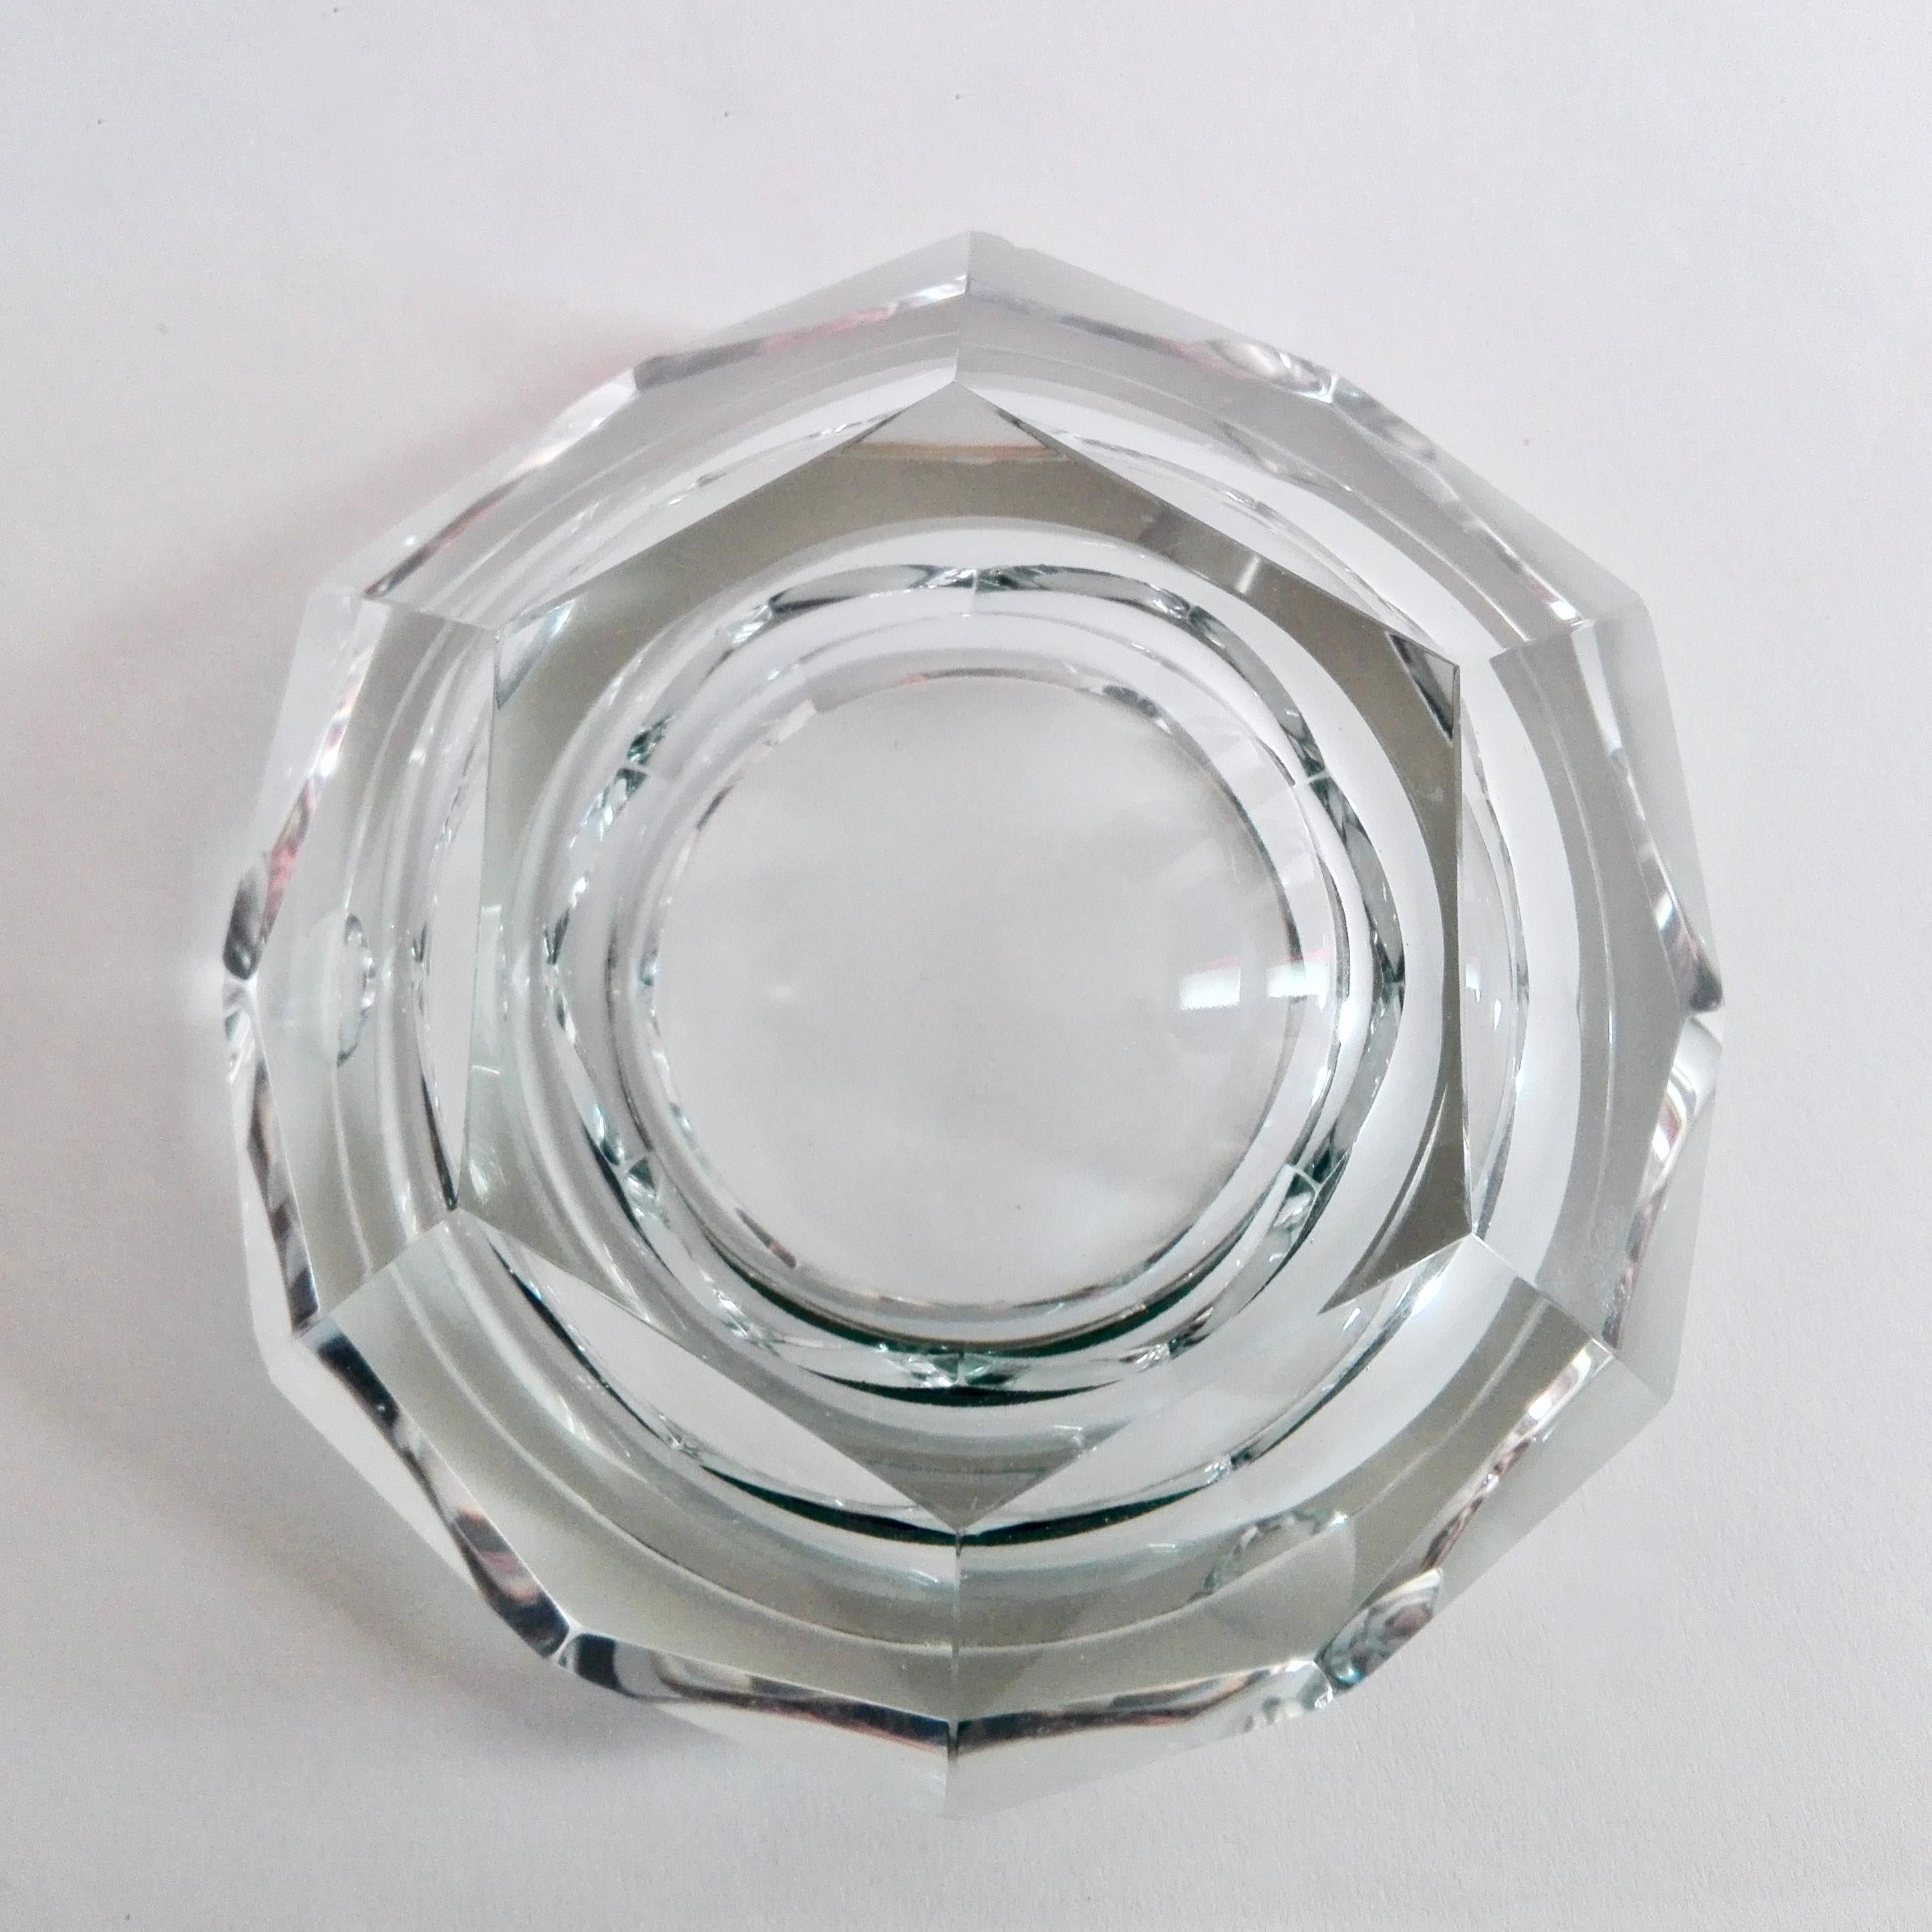 Faceted 1960s vintage hexagonal ashtray/pocket emptier in faceted cut crystal.